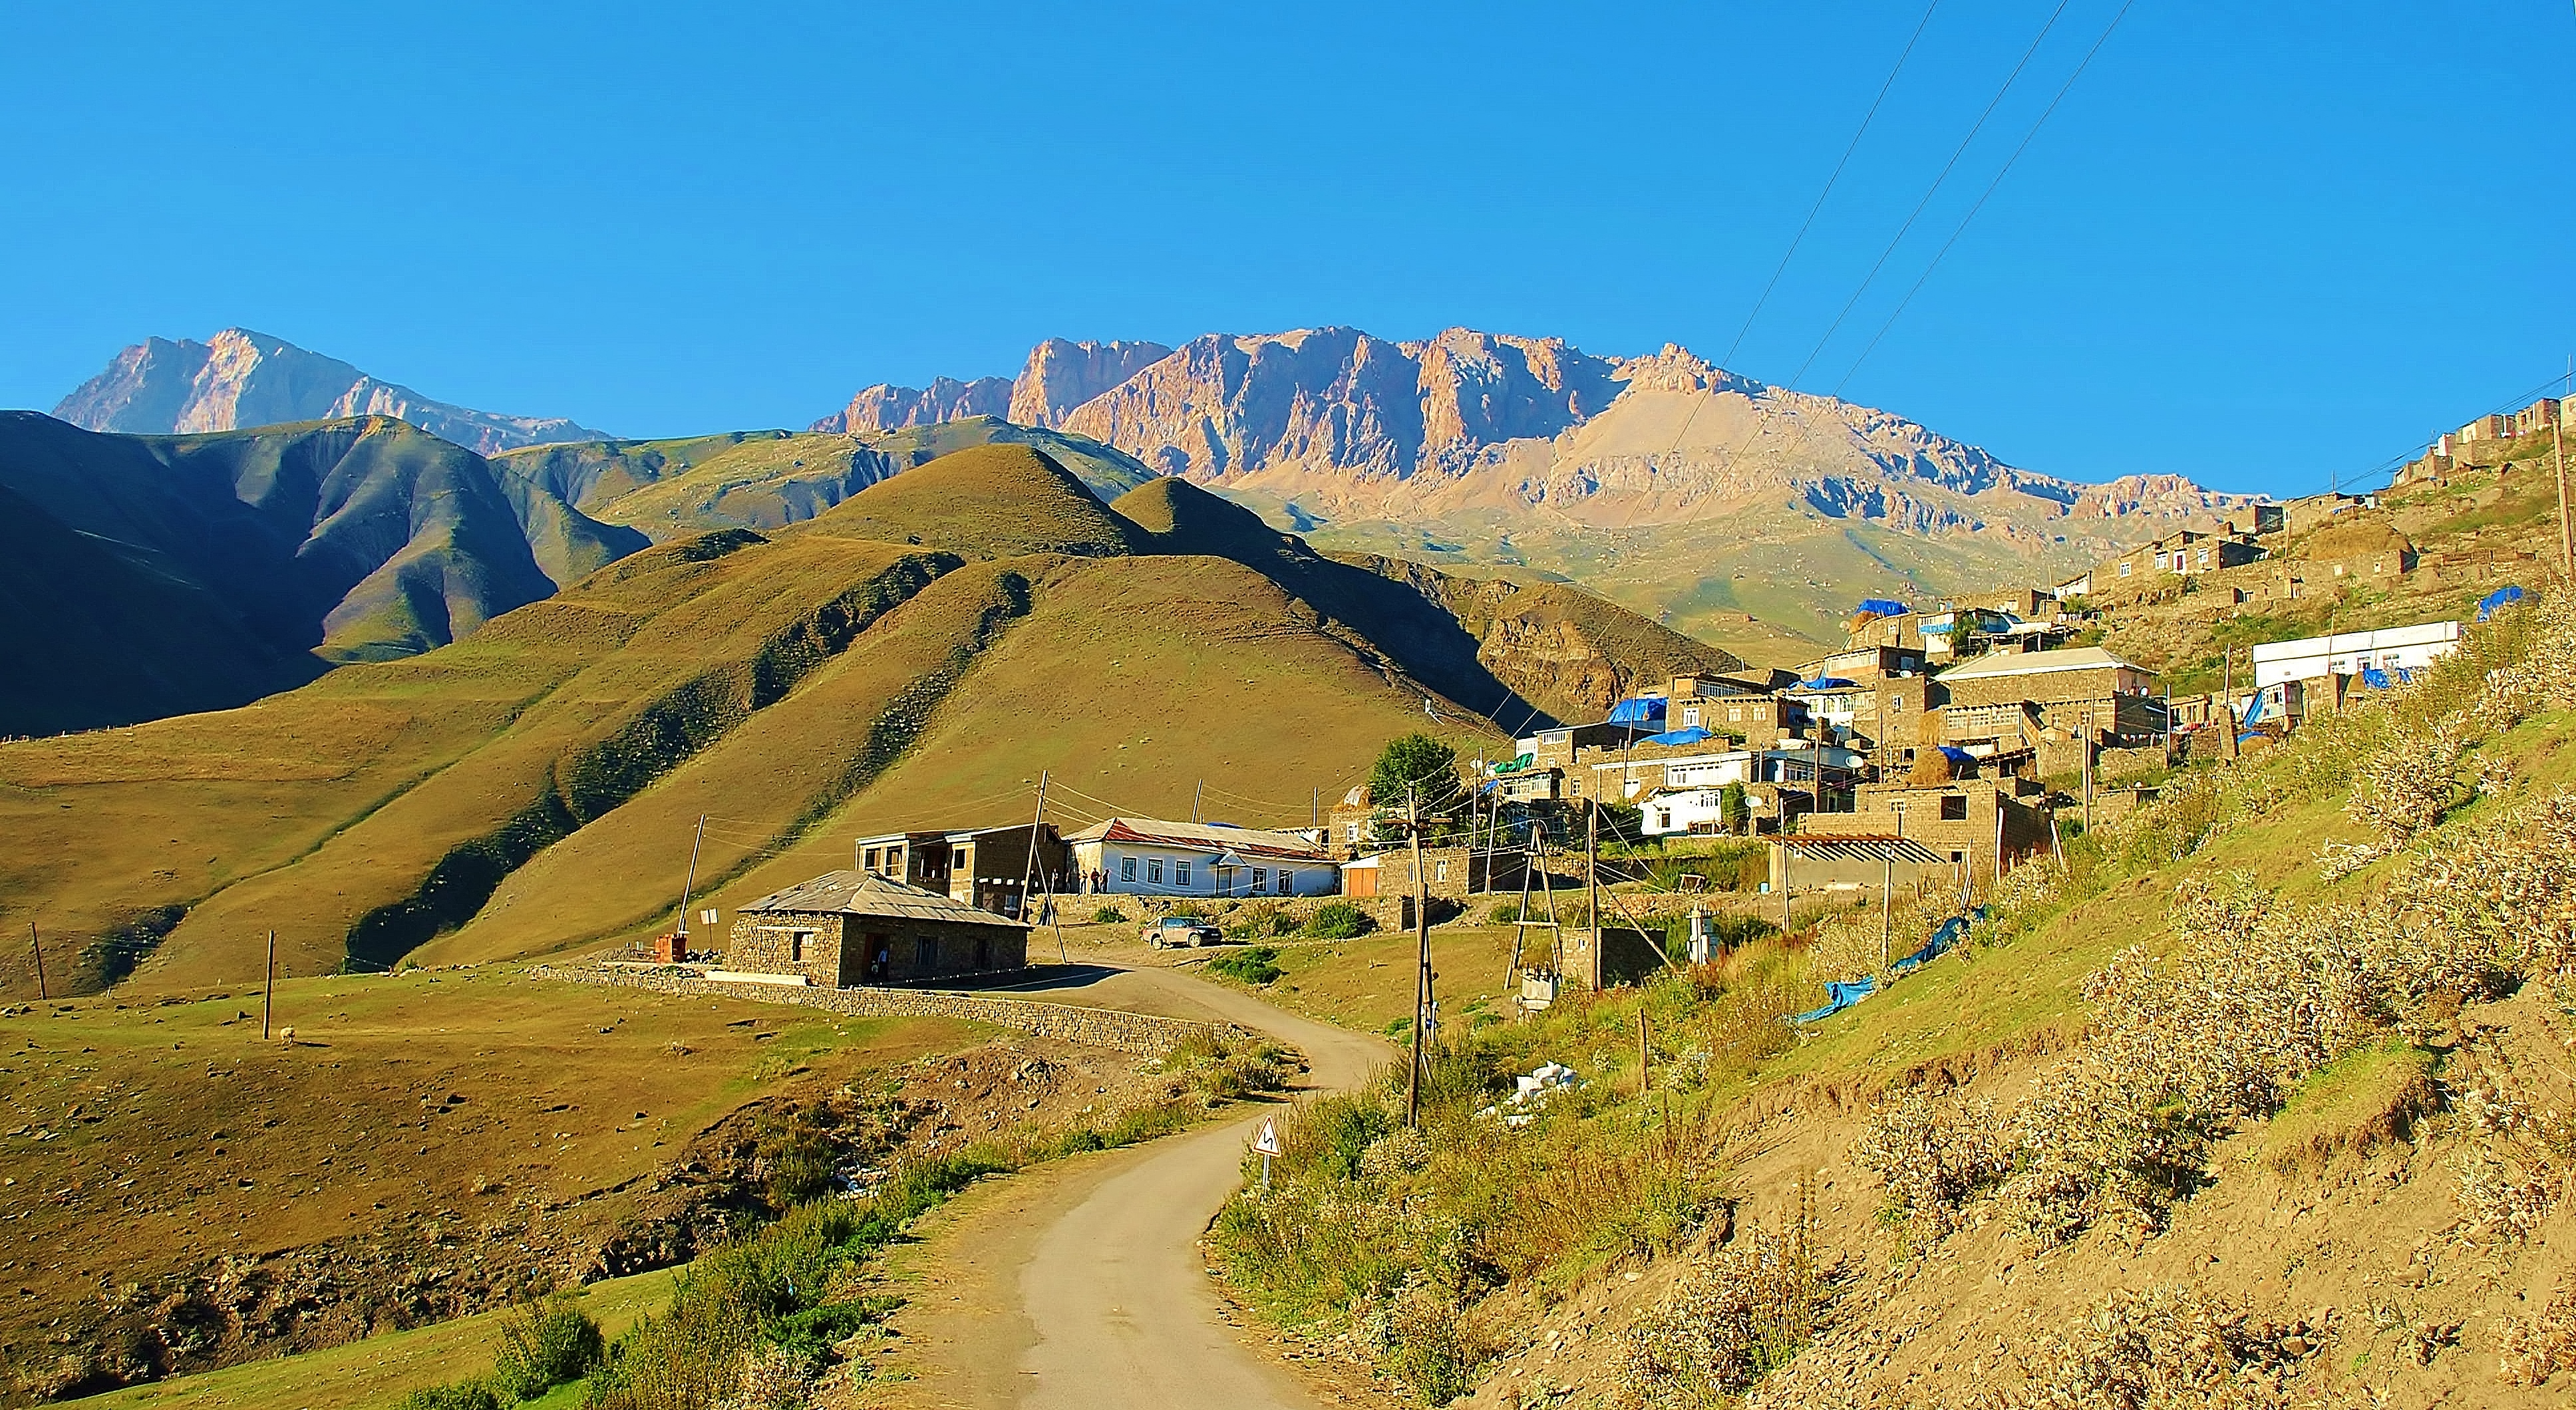 Azerbaijan - hill station Xinaliq which lies at the altitude of 2350 above the sea level